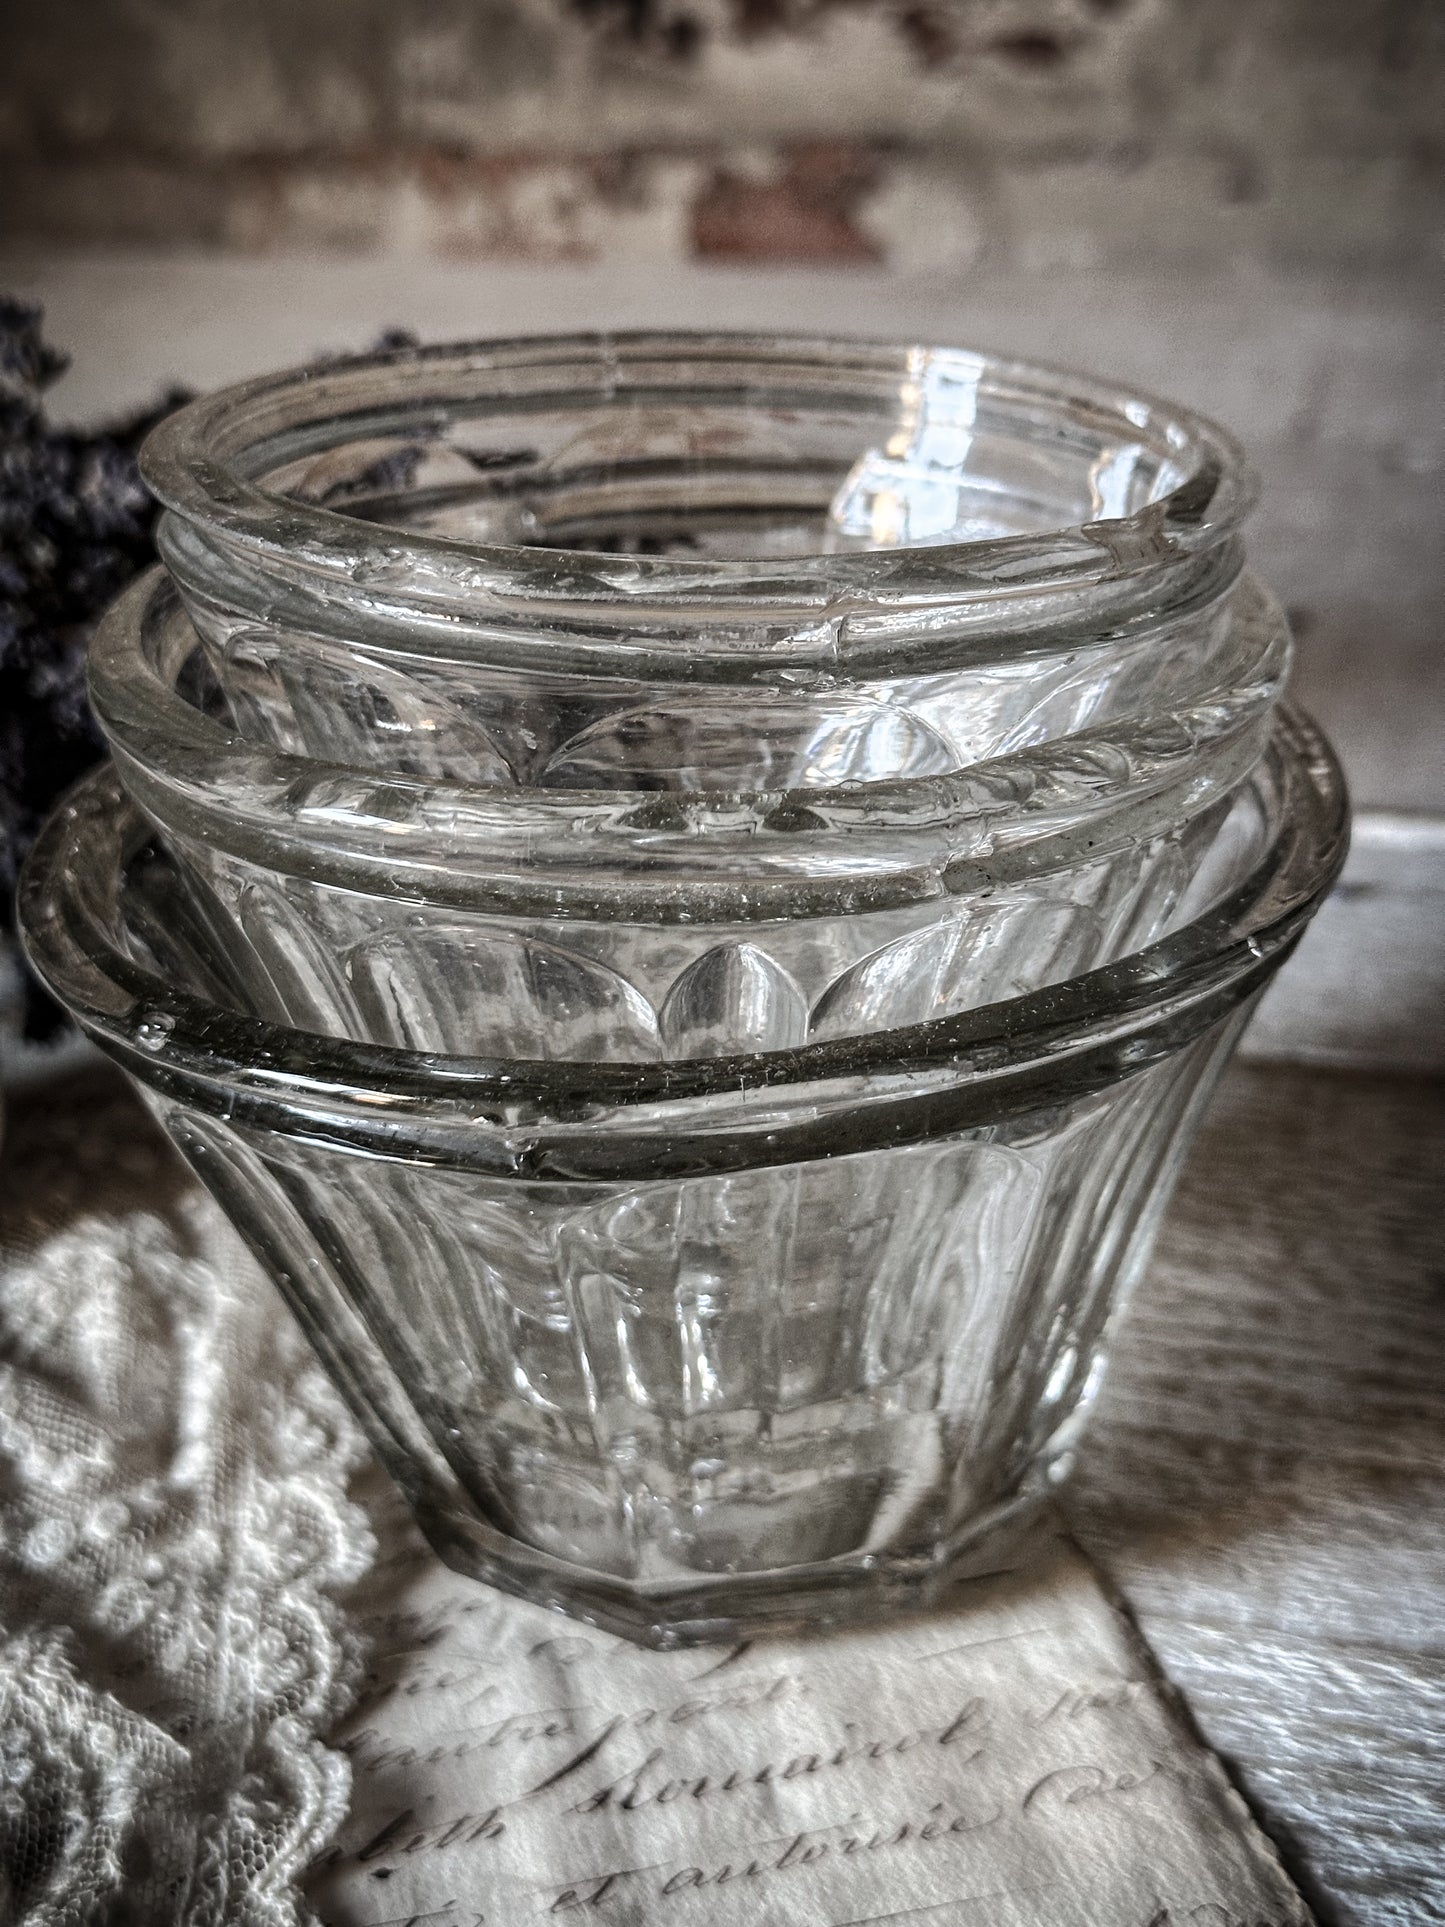 A beautiful French conical confiture jar #6